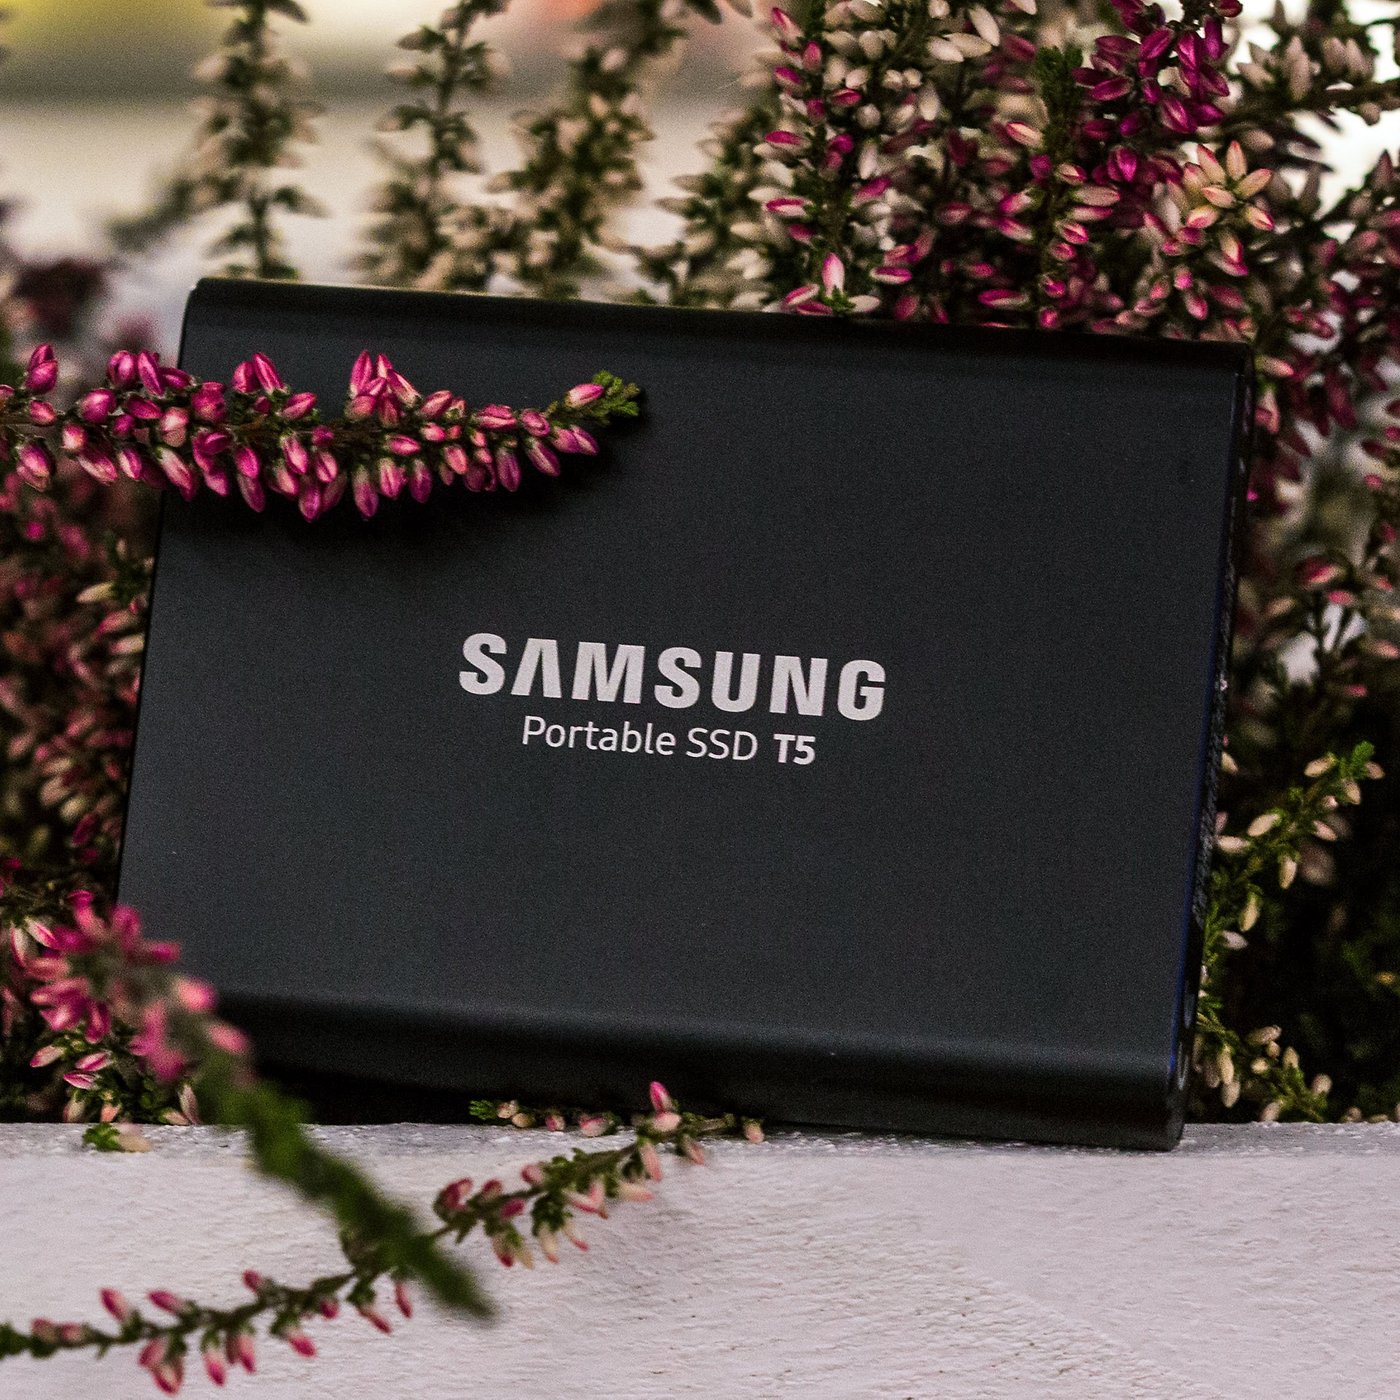 samsung portable ssd not detected mac